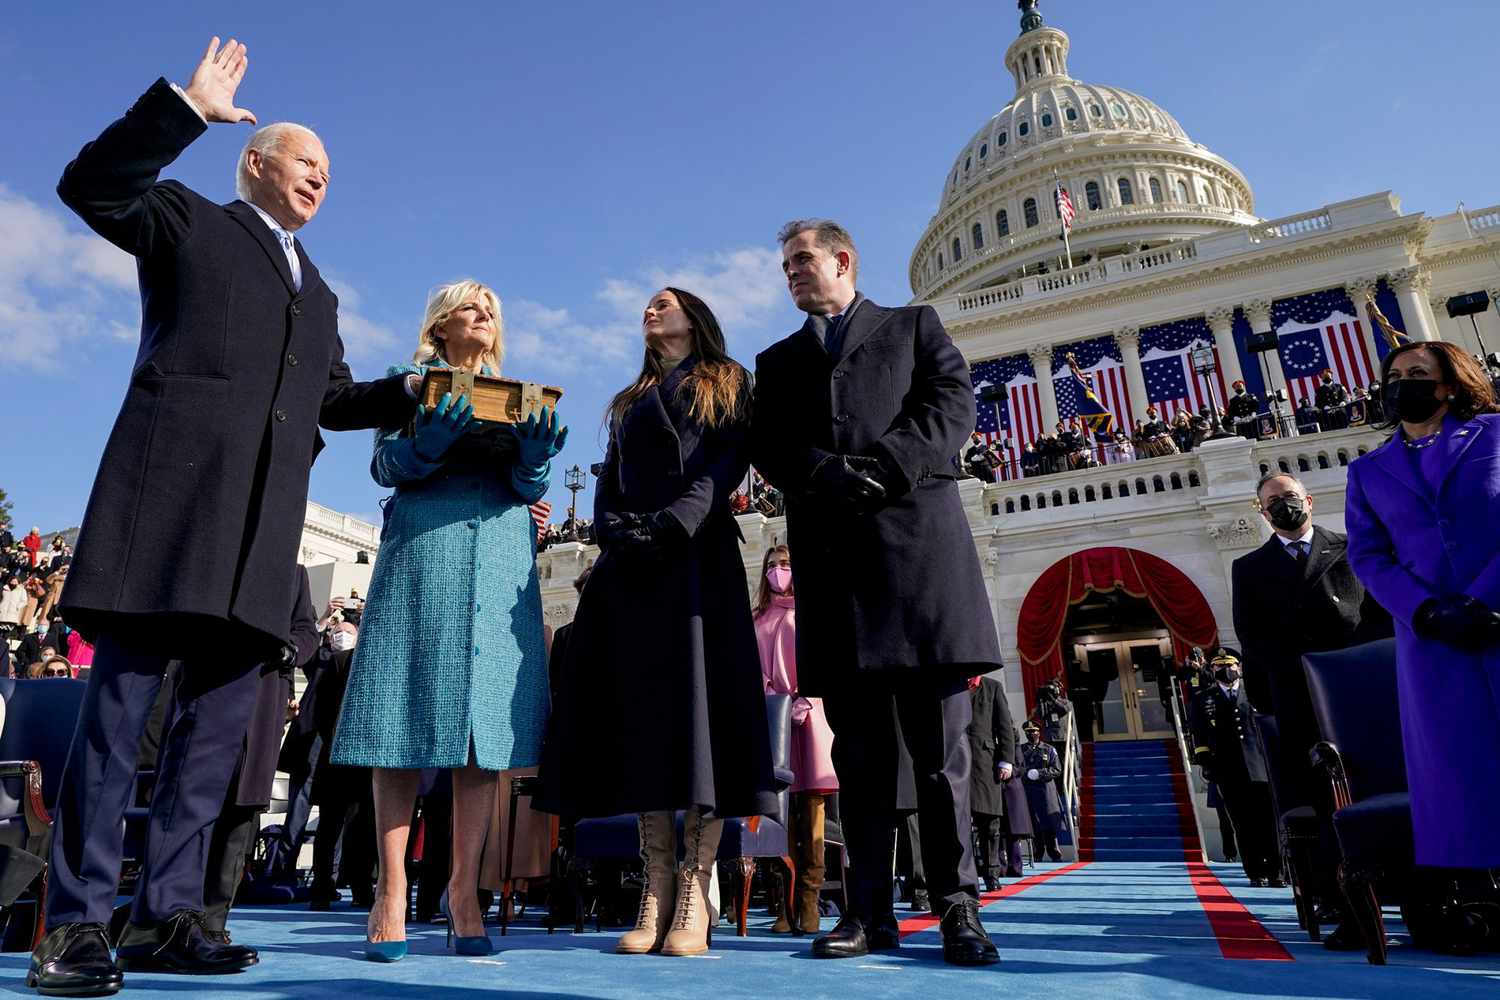 Joe Biden is sworn in as the 46th president of the United States by Chief Justice John Roberts, as Jill Biden and their children Ashley and Hunter look on on the West Front of the U.S. Capitol on January 20, 2021 in Washington